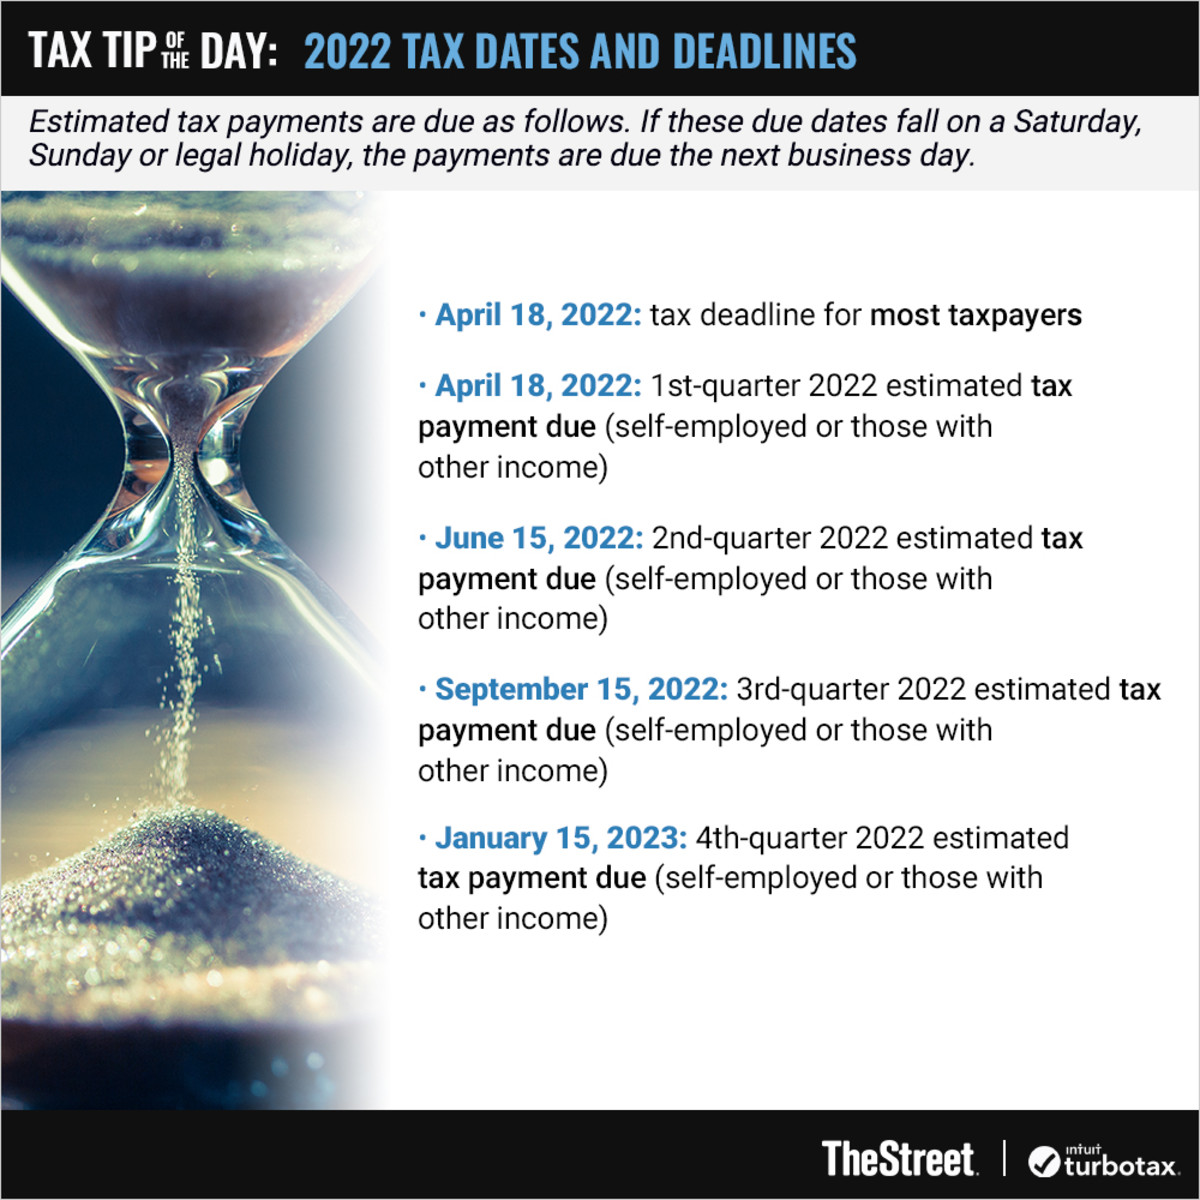 Graphic: 2022 Tax Dates and Deadlines